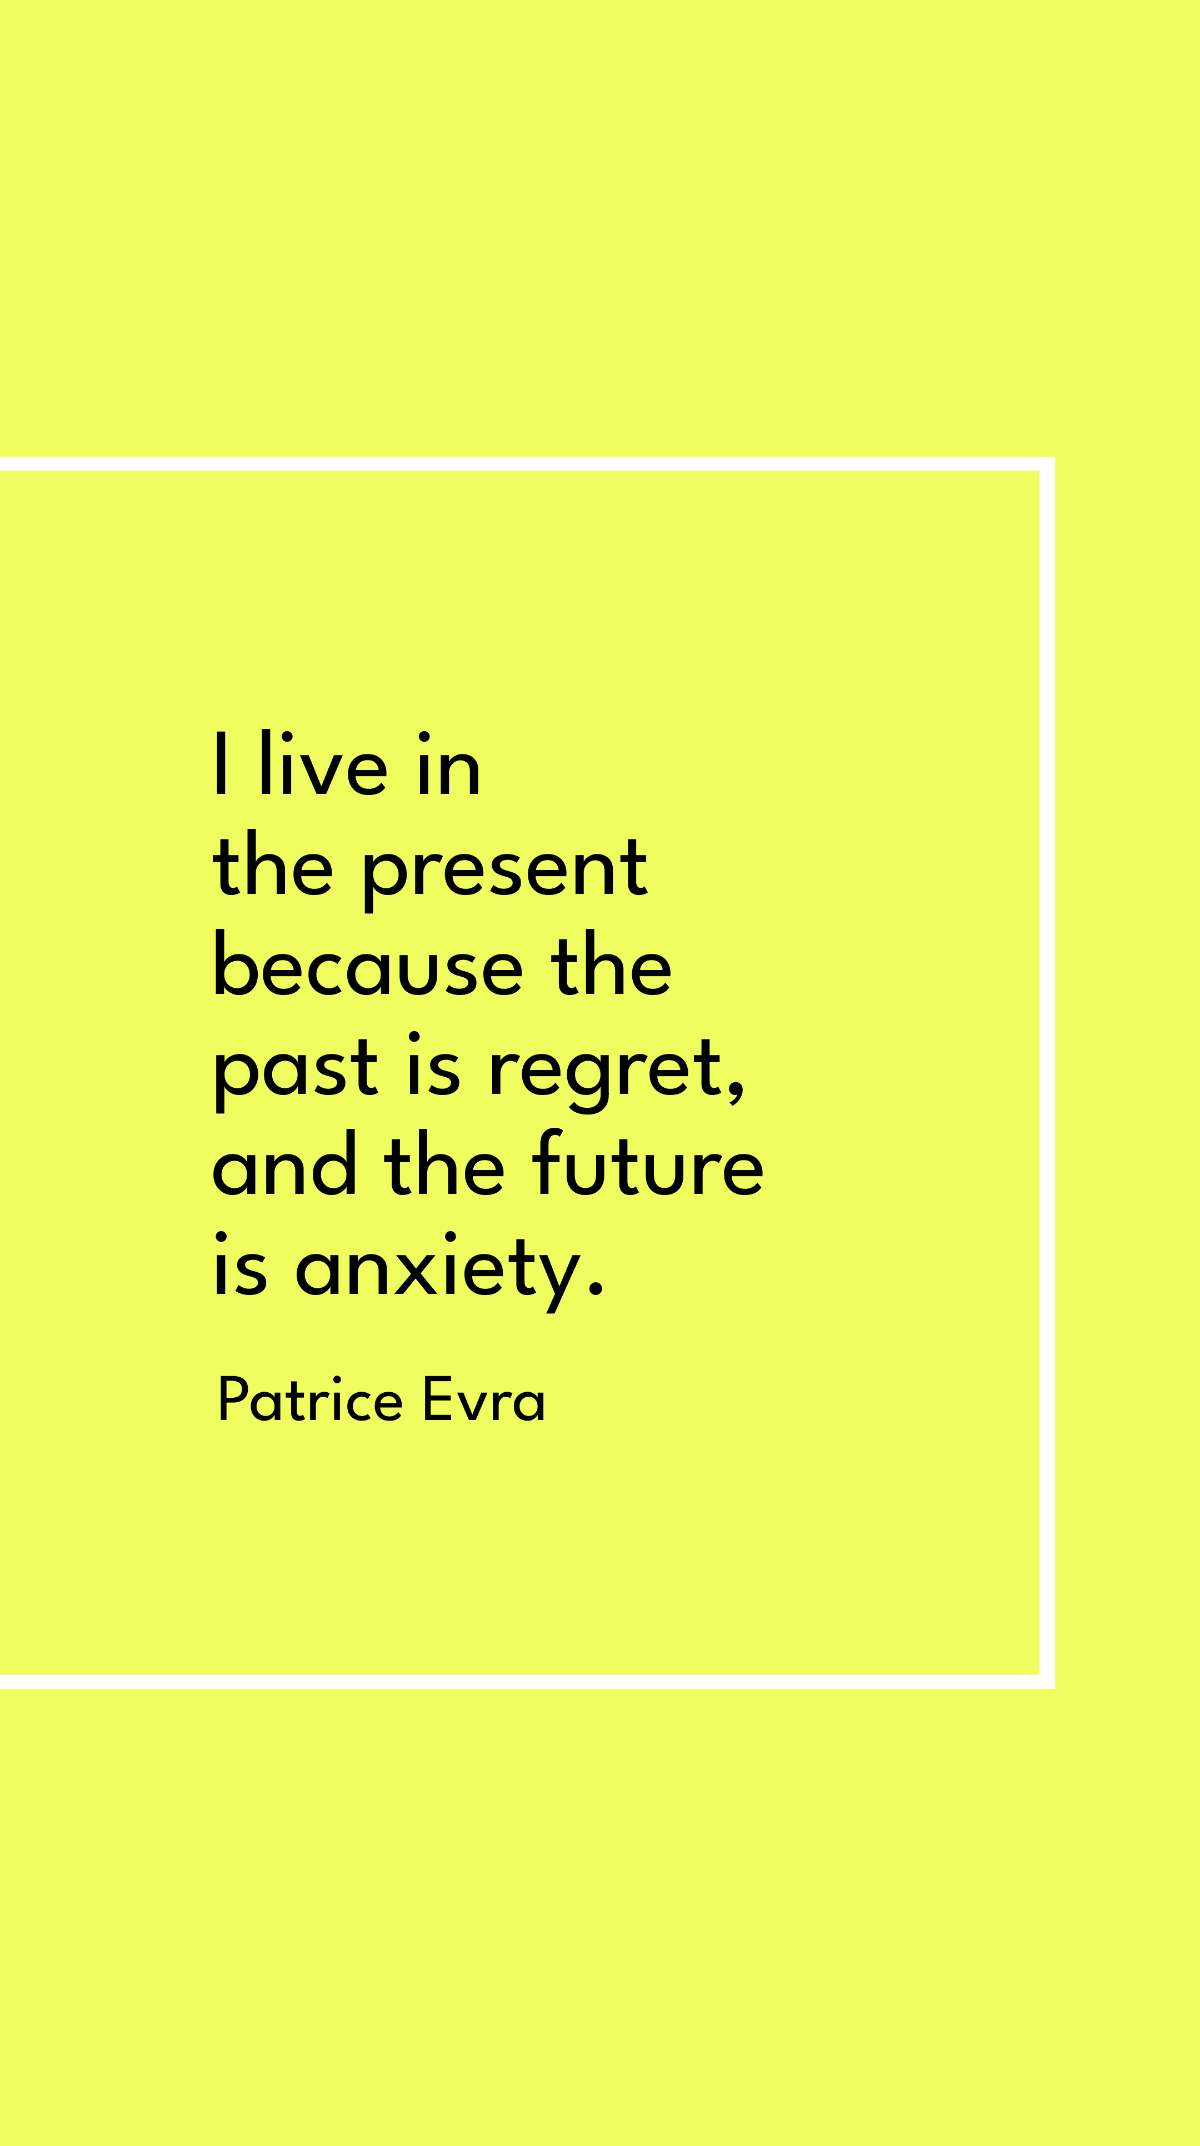 Free Patrice Evra - I live in the present because the past is regret, and the future is anxiety. Template